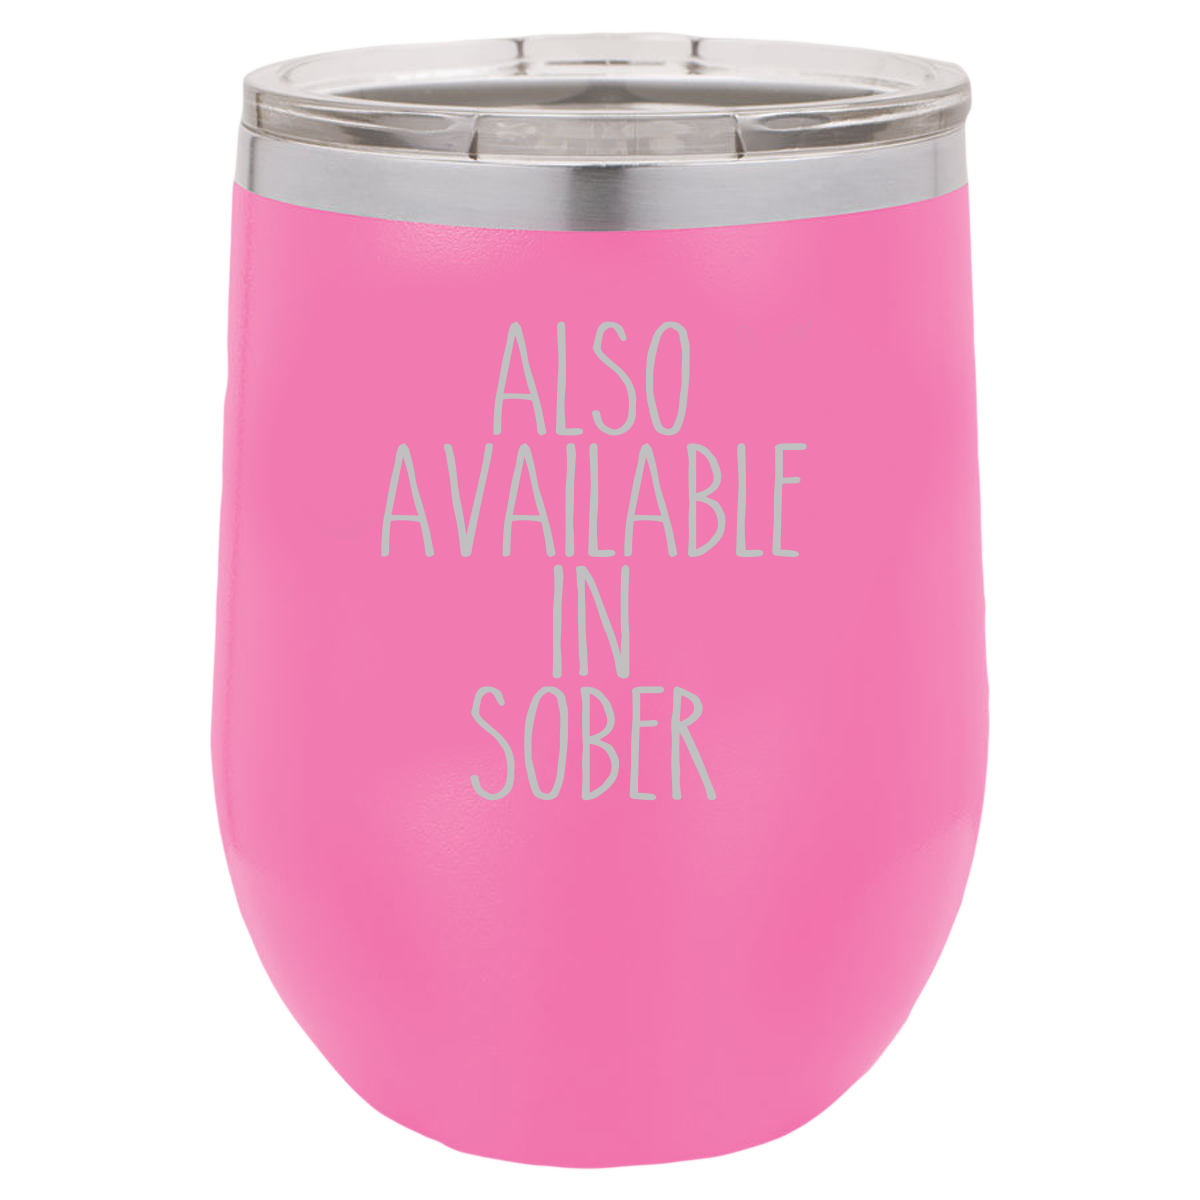 Insulated Wine Tumbler, Wine Tumbler with Lid, Insulated Wine  Glass, Stainless Steel Wine Tumbler, Champagne Tumbler, Also Available In Sober - Mug Project